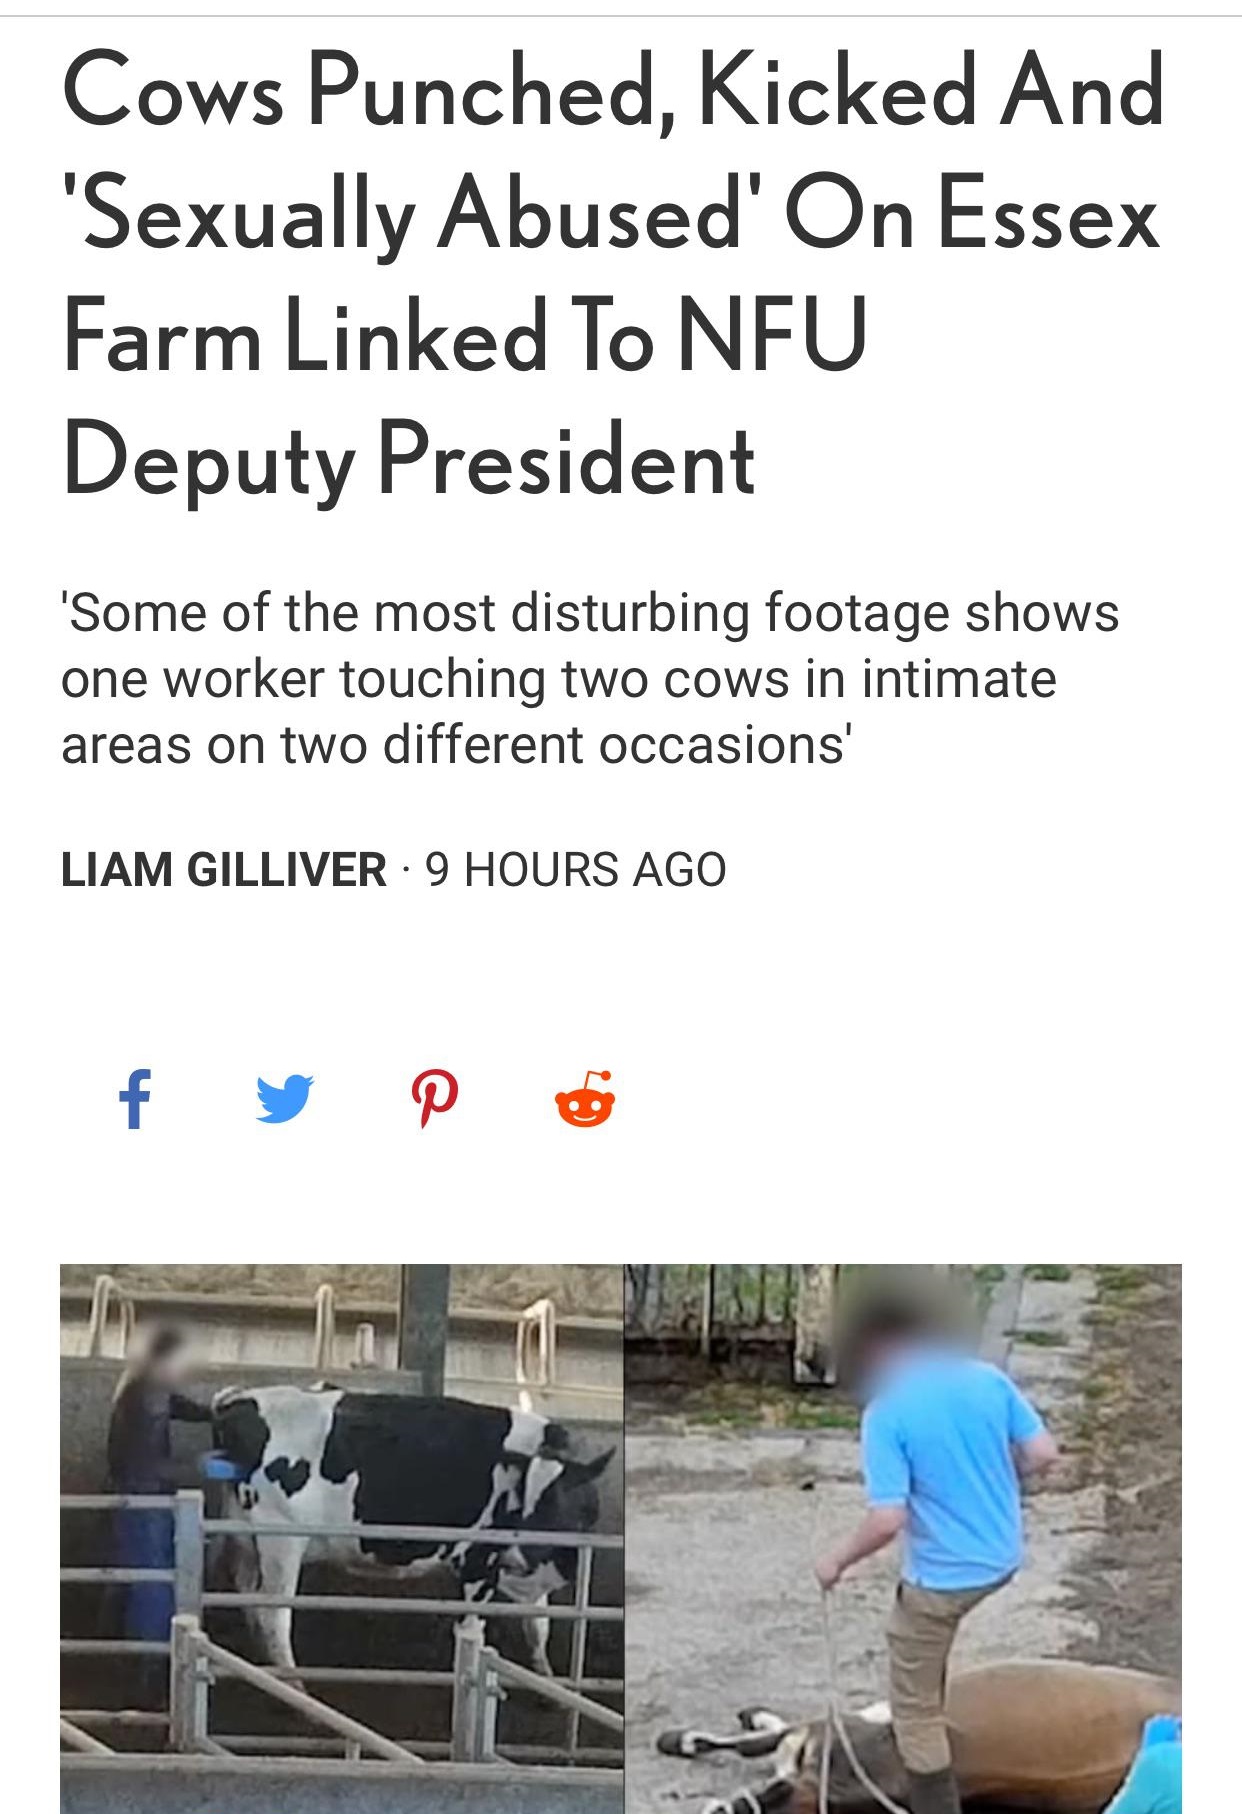 four points by sheraton - Cows Punched, Kicked And 'Sexually Abused' On Essex Farm Linked To Nfu Deputy President 'Some of the most disturbing footage shows one worker touching two cows in intimate areas on two different occasions' Liam Gilliver 9 Hours A